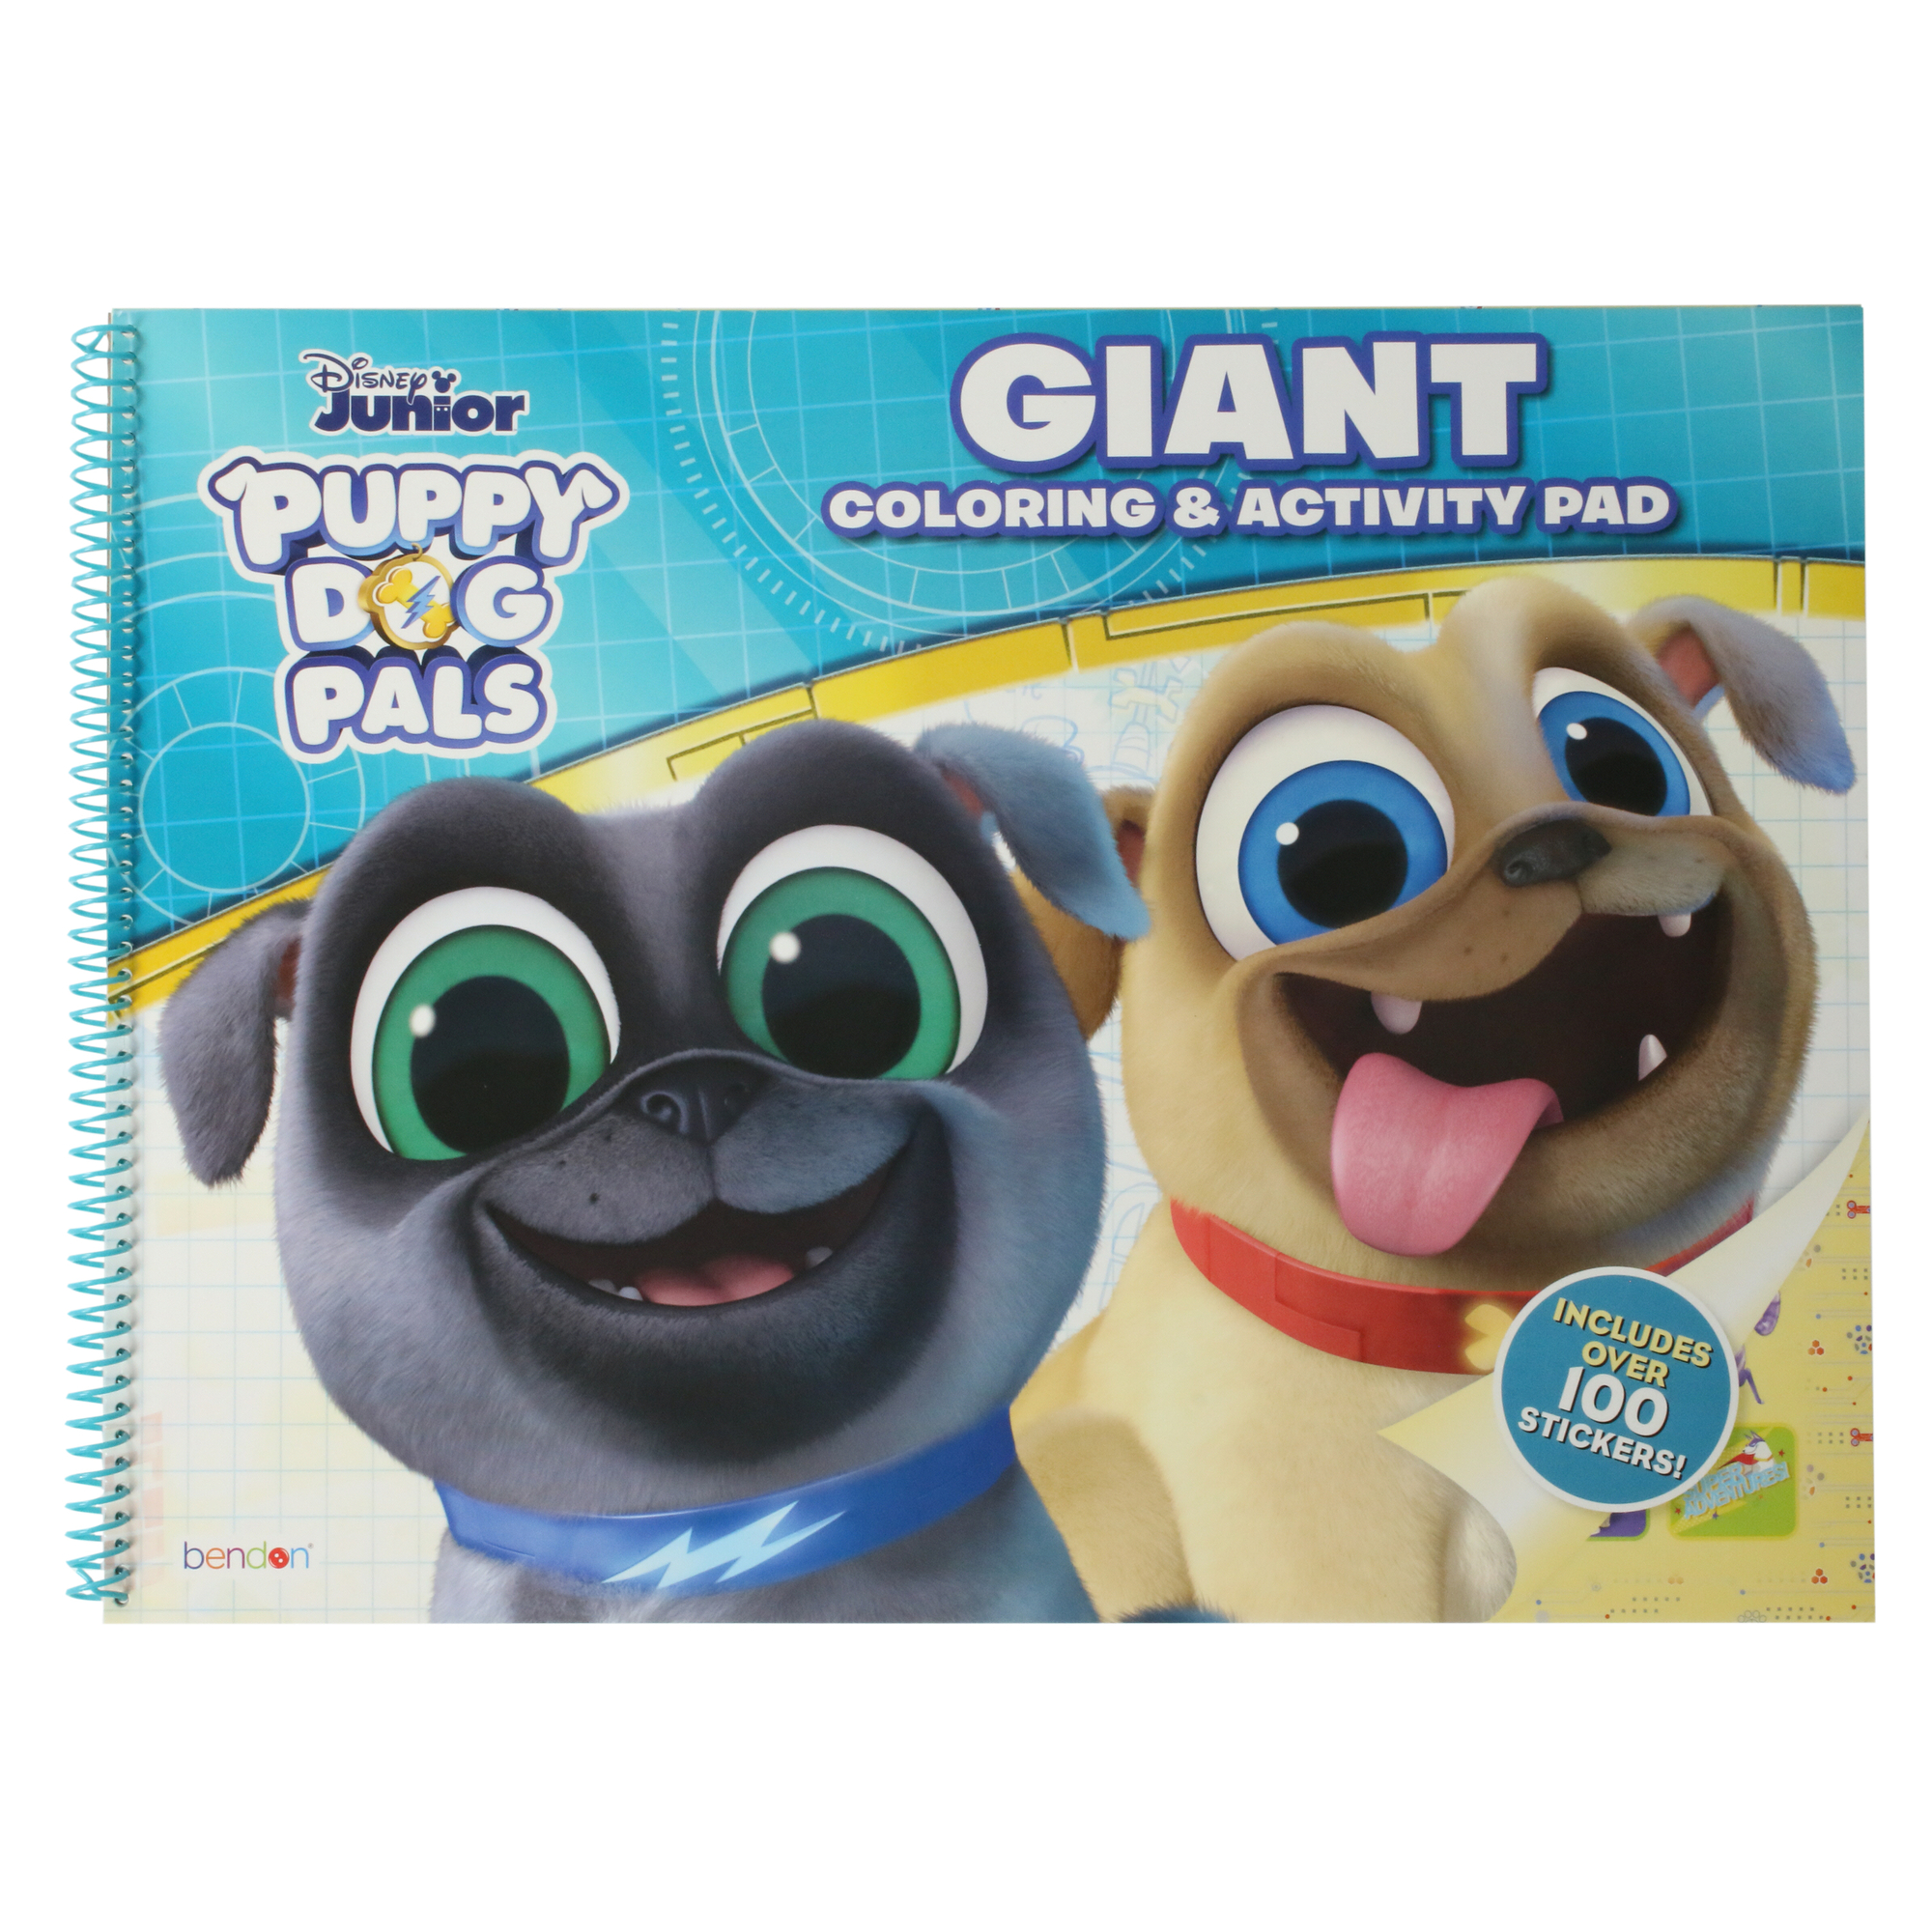 puppy dog pals™ giant coloring & activity pad